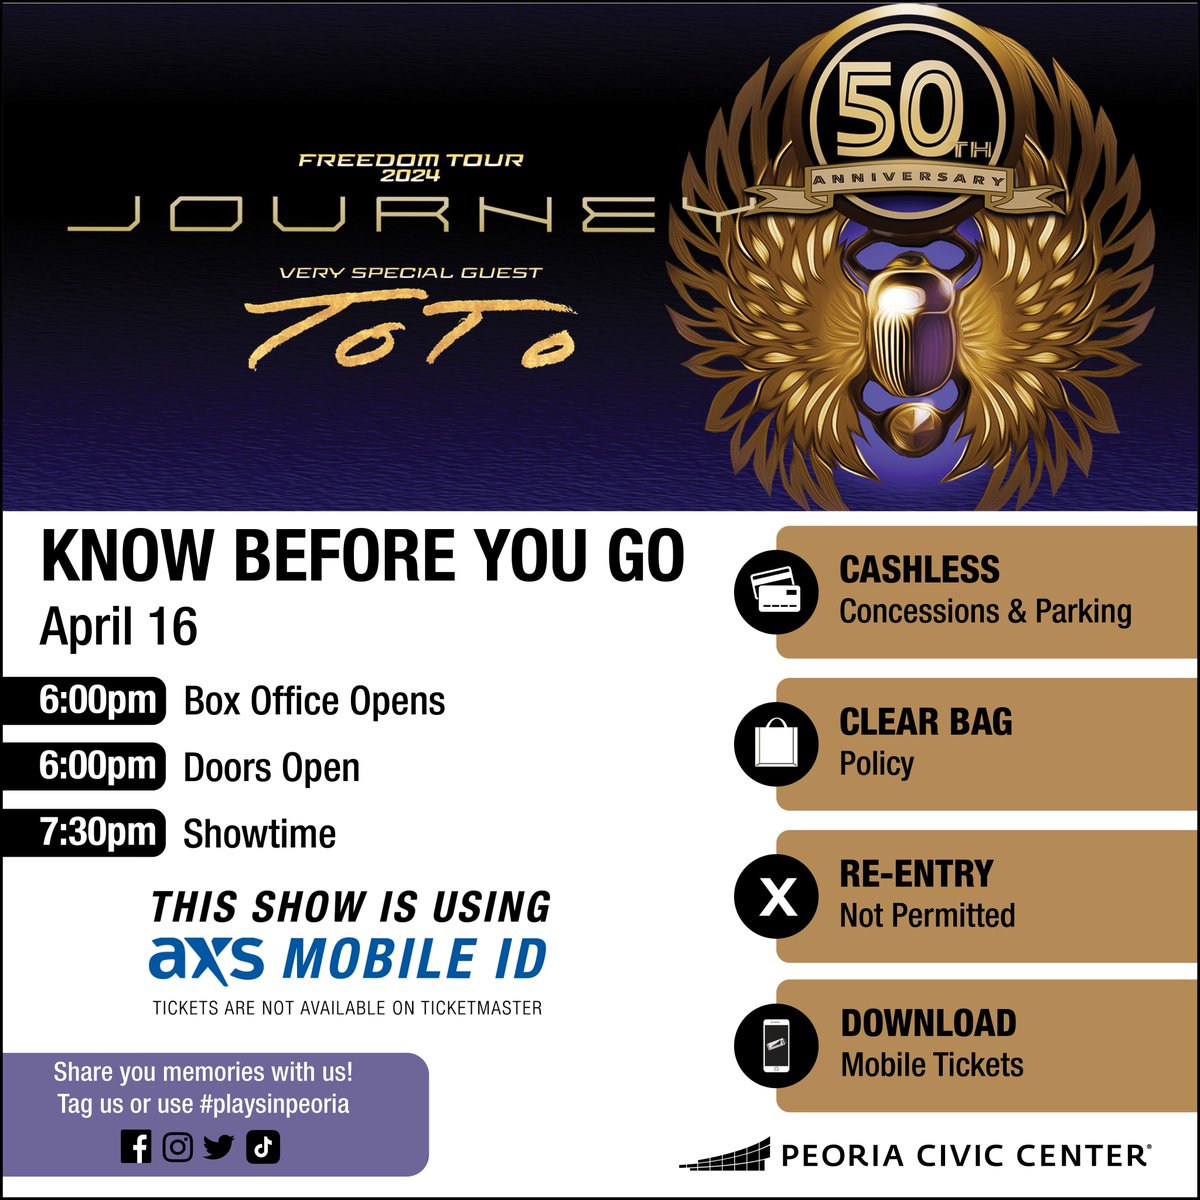 KNOW BEFORE YOU GO Journey will be in the Peoria Civic Center Arena on Tuesday! Here are some important reminders before you go to the show. More details at bit.ly/PCCKnowBeforeY…